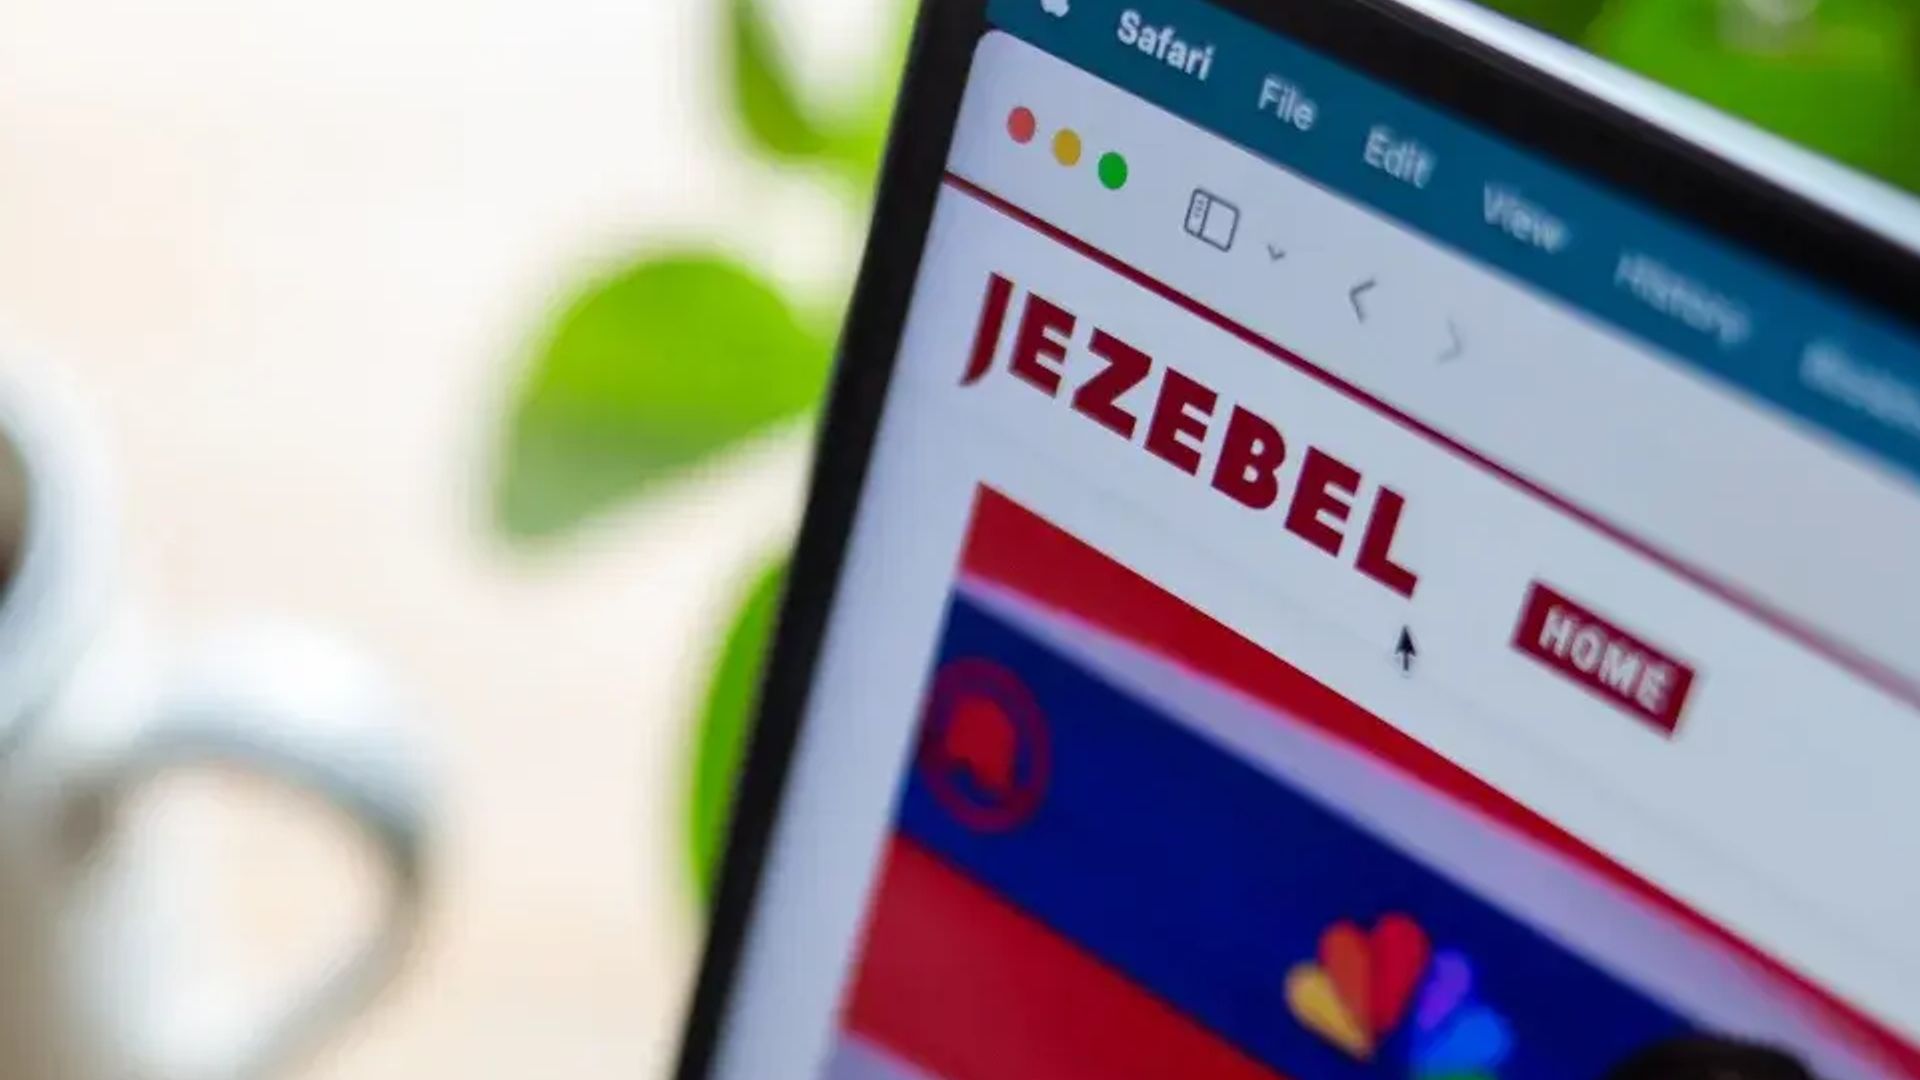 The woman-focused website Jezebel is shutting down after 16 years. Parent company G/O Media announced that 23 people will be laid off.